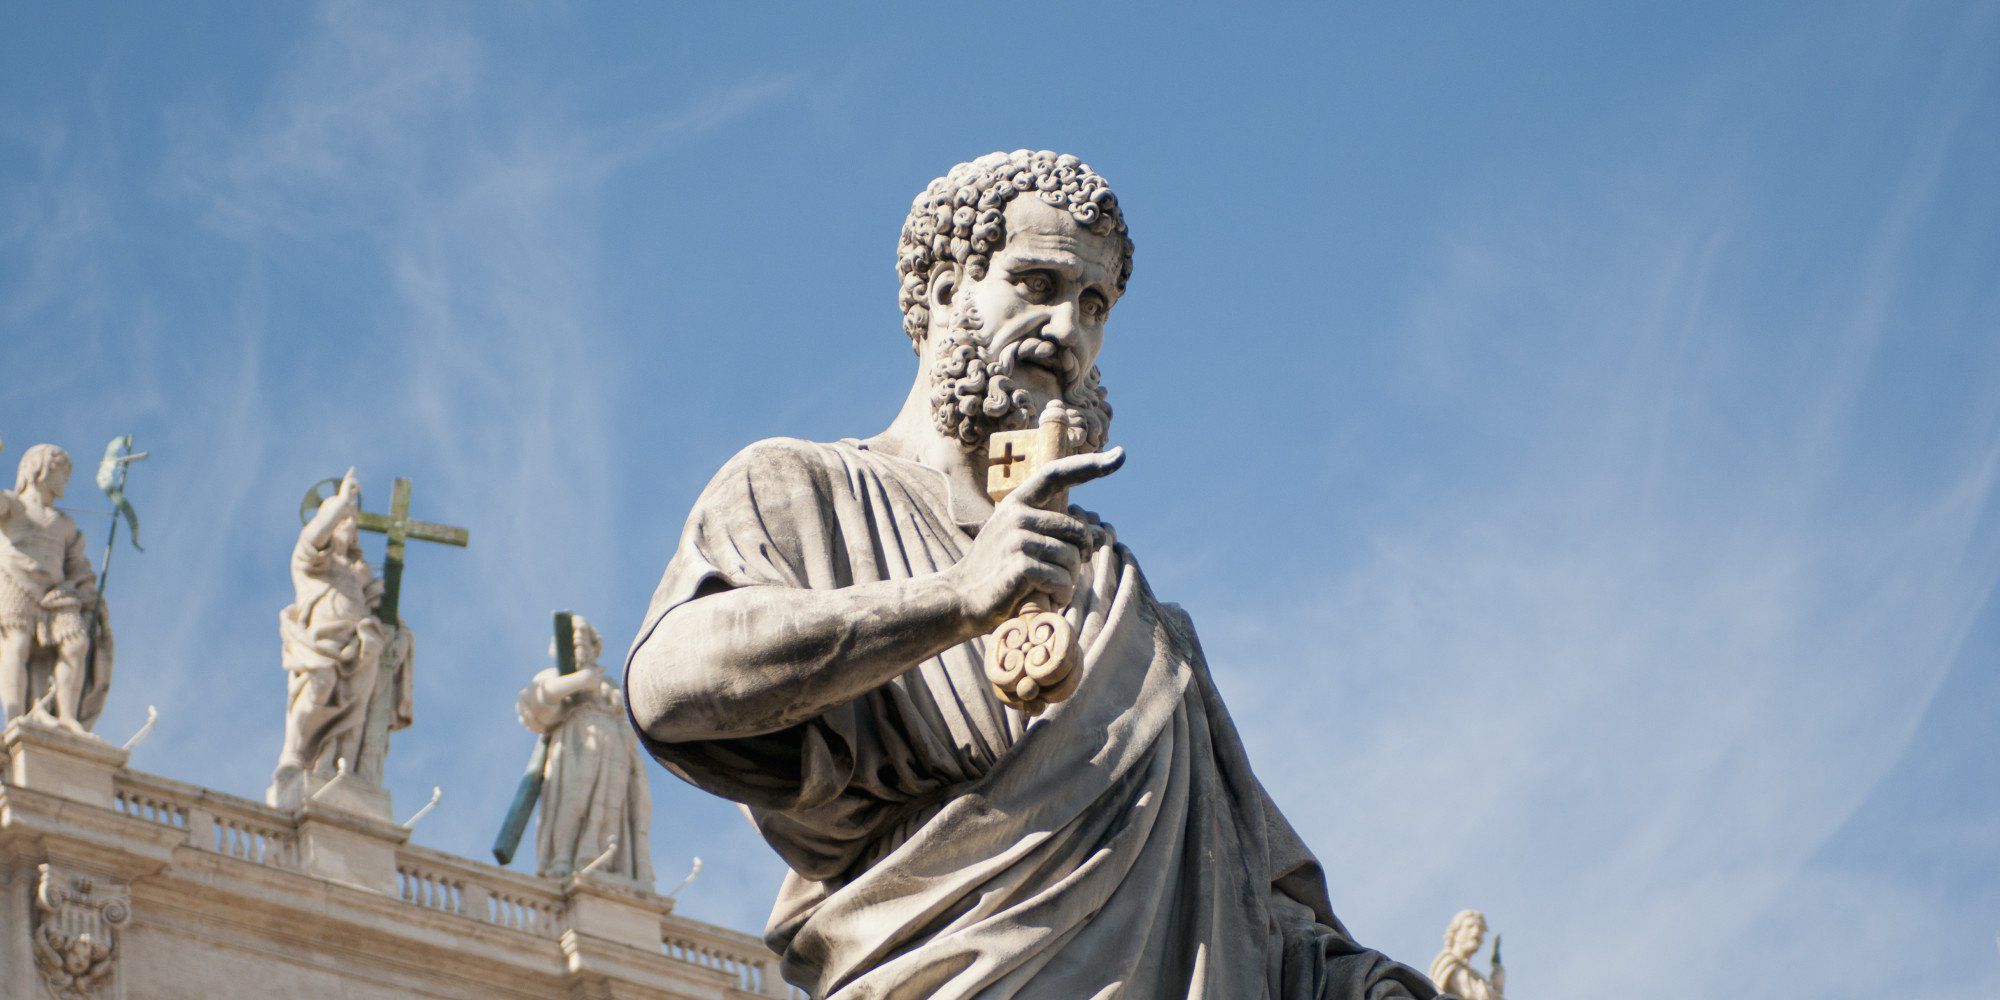 Statue of St. Peter and the Bascilica's facade